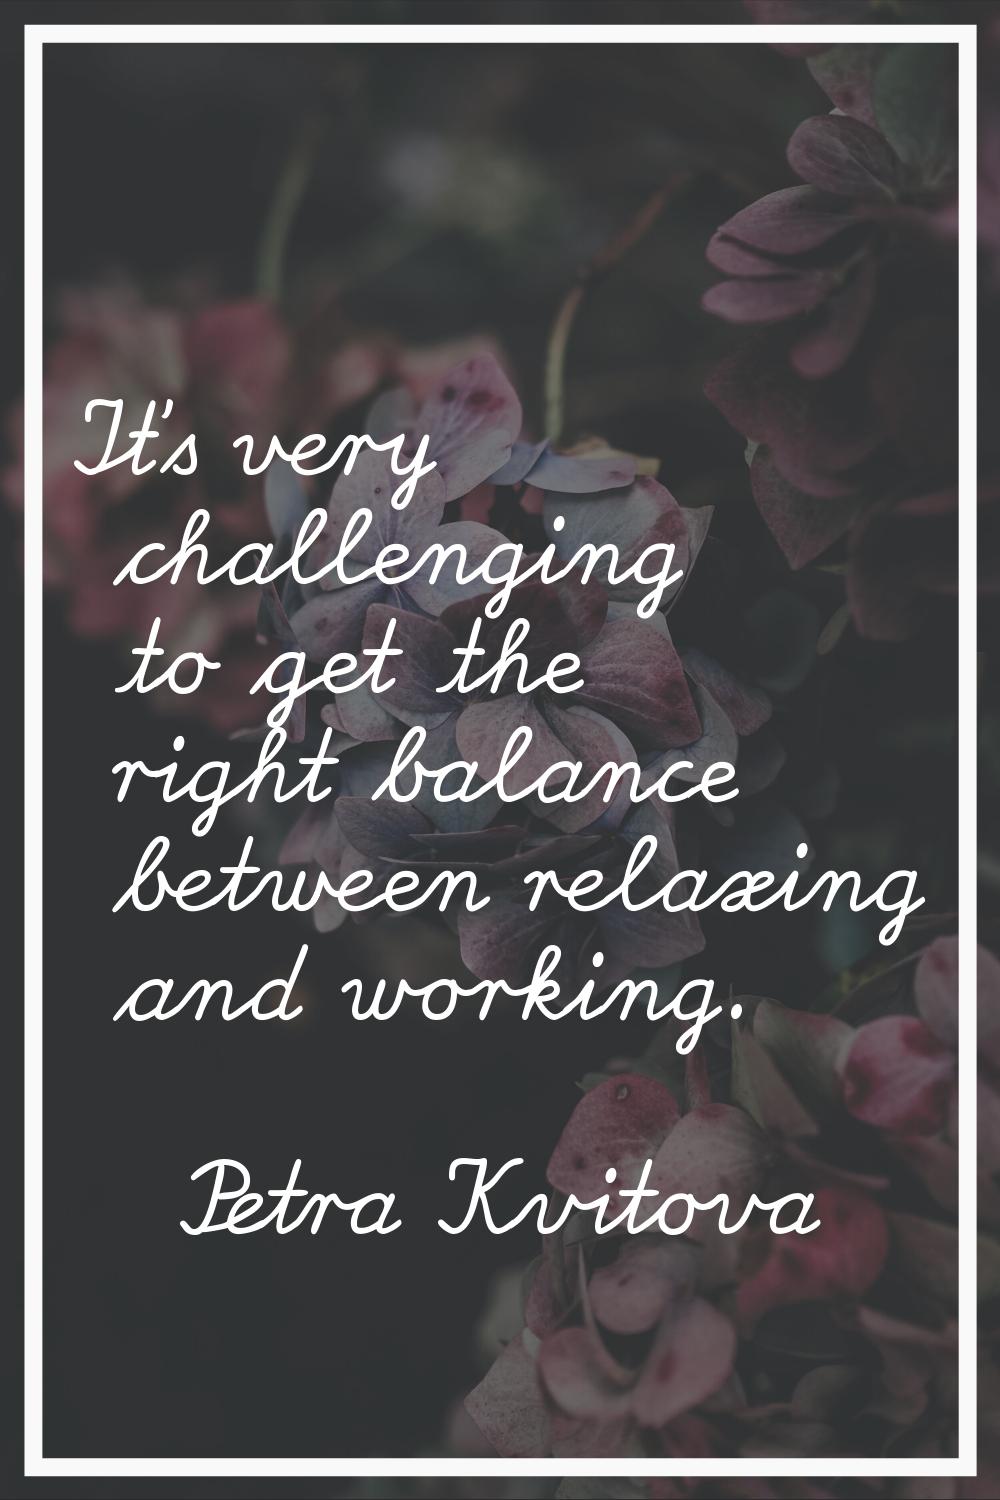 It's very challenging to get the right balance between relaxing and working.